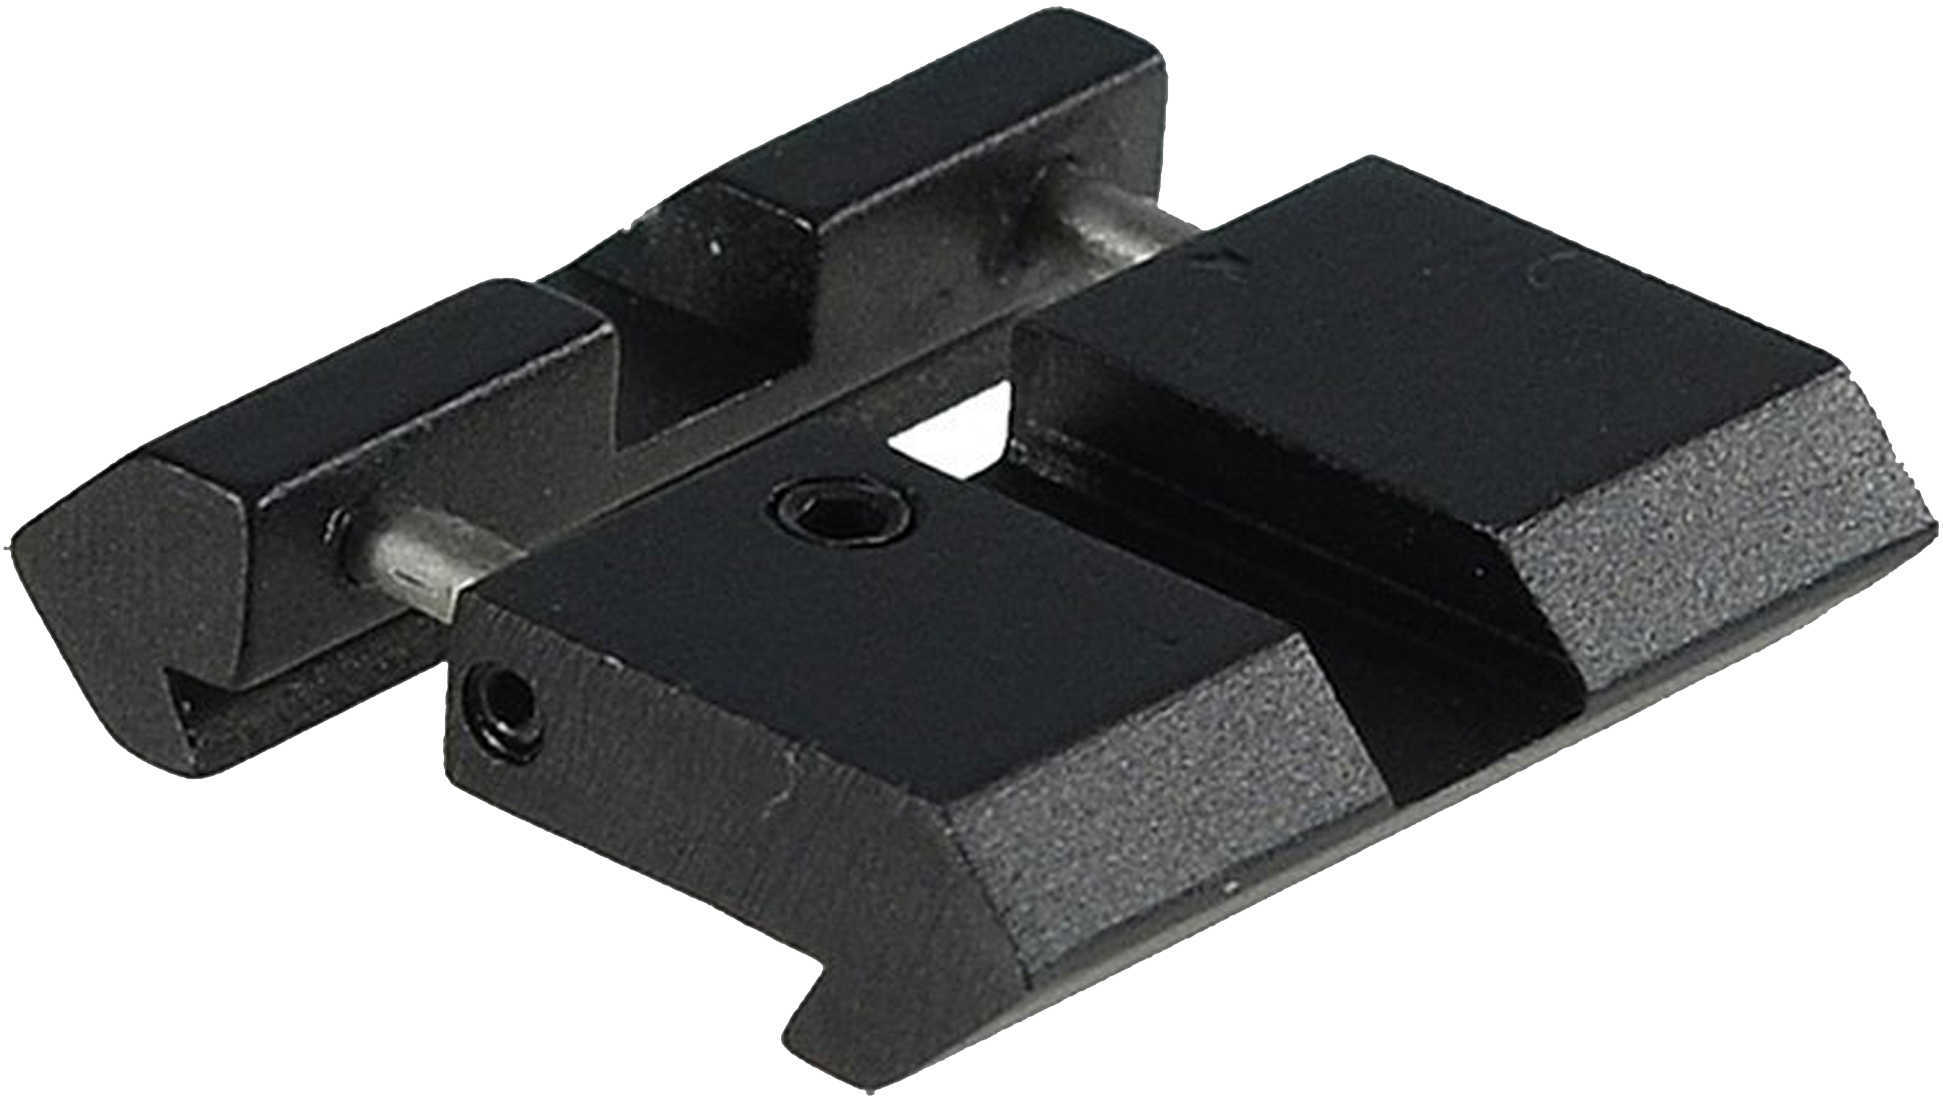 Leapers Inc. - UTG Base Fits .22/Airgun to Picatinny/Weaver Rails Low Pro Snap-In Adaptor MNT-DT2PW01